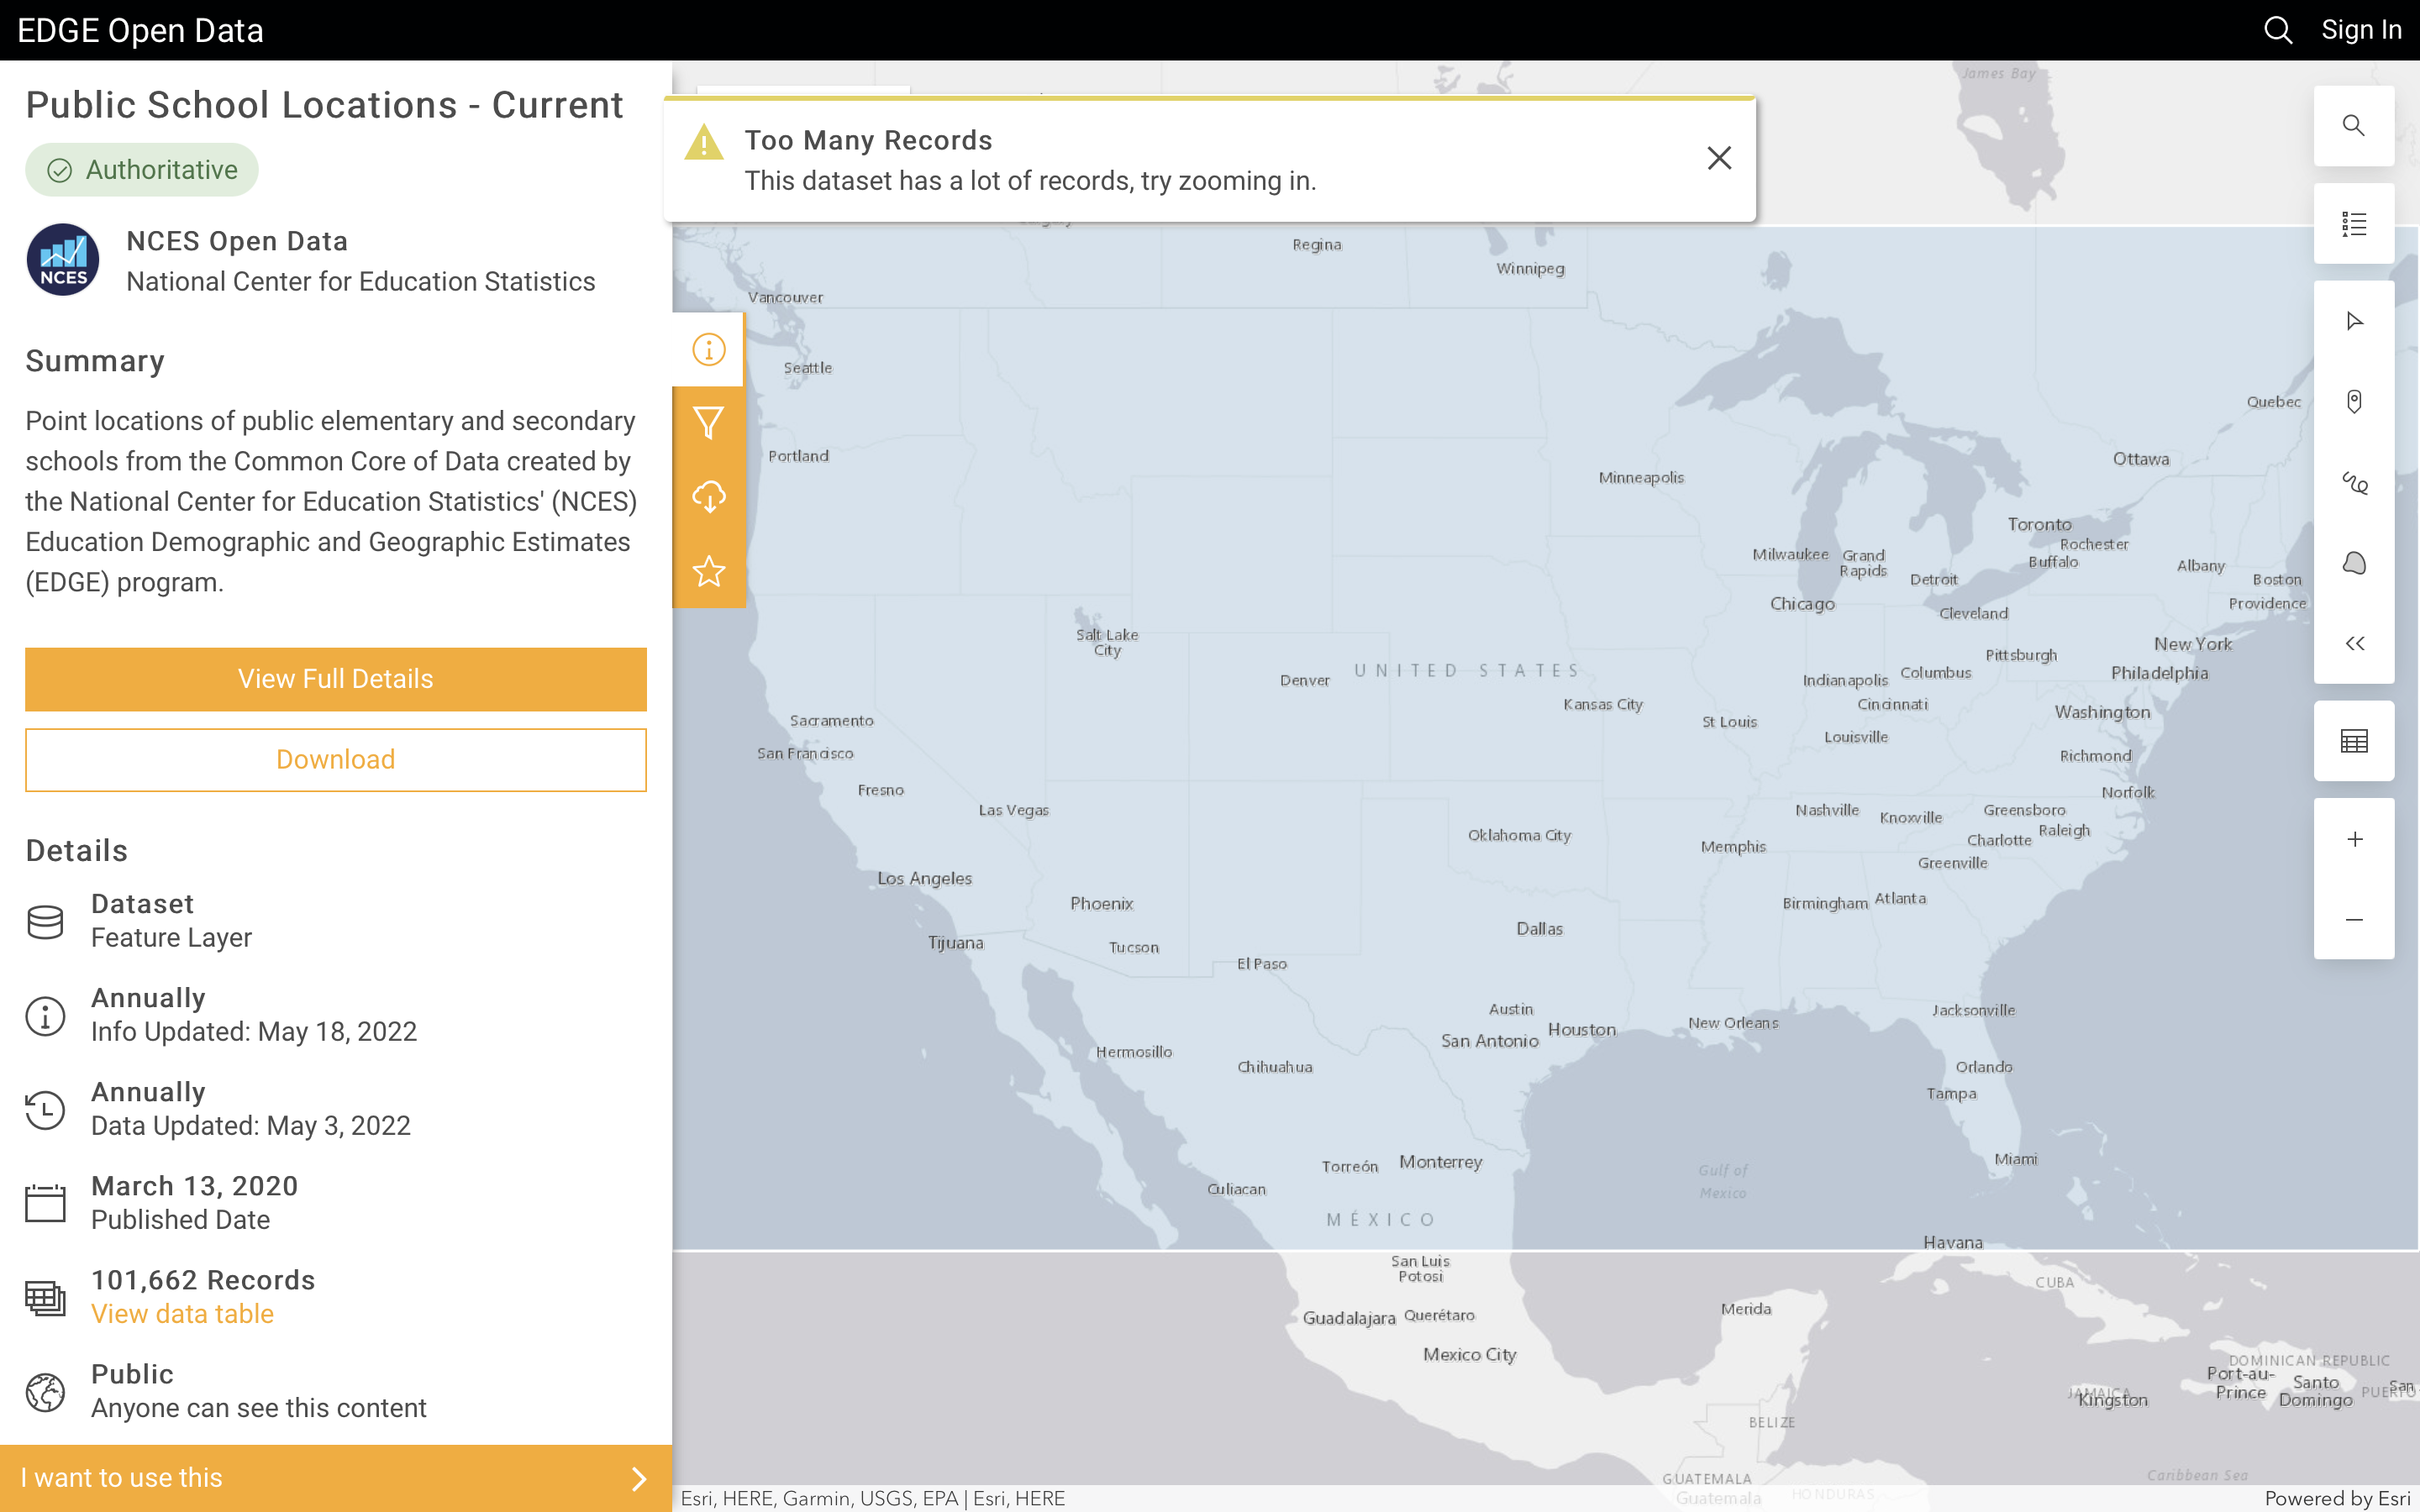 The screenshot shows a left-hand sidebar menu with a summary section, describing the dataset. Below that on the sidebar is a details section, which provides some metadata about the dataset illustrated on the page. To the right is an interactive map of the United States. Over the map is a gigantic opaque box and an alert that reads "Too Many Records". At the bottom of the left-hand sidebar is a highlighted button that reads "I want to use this."